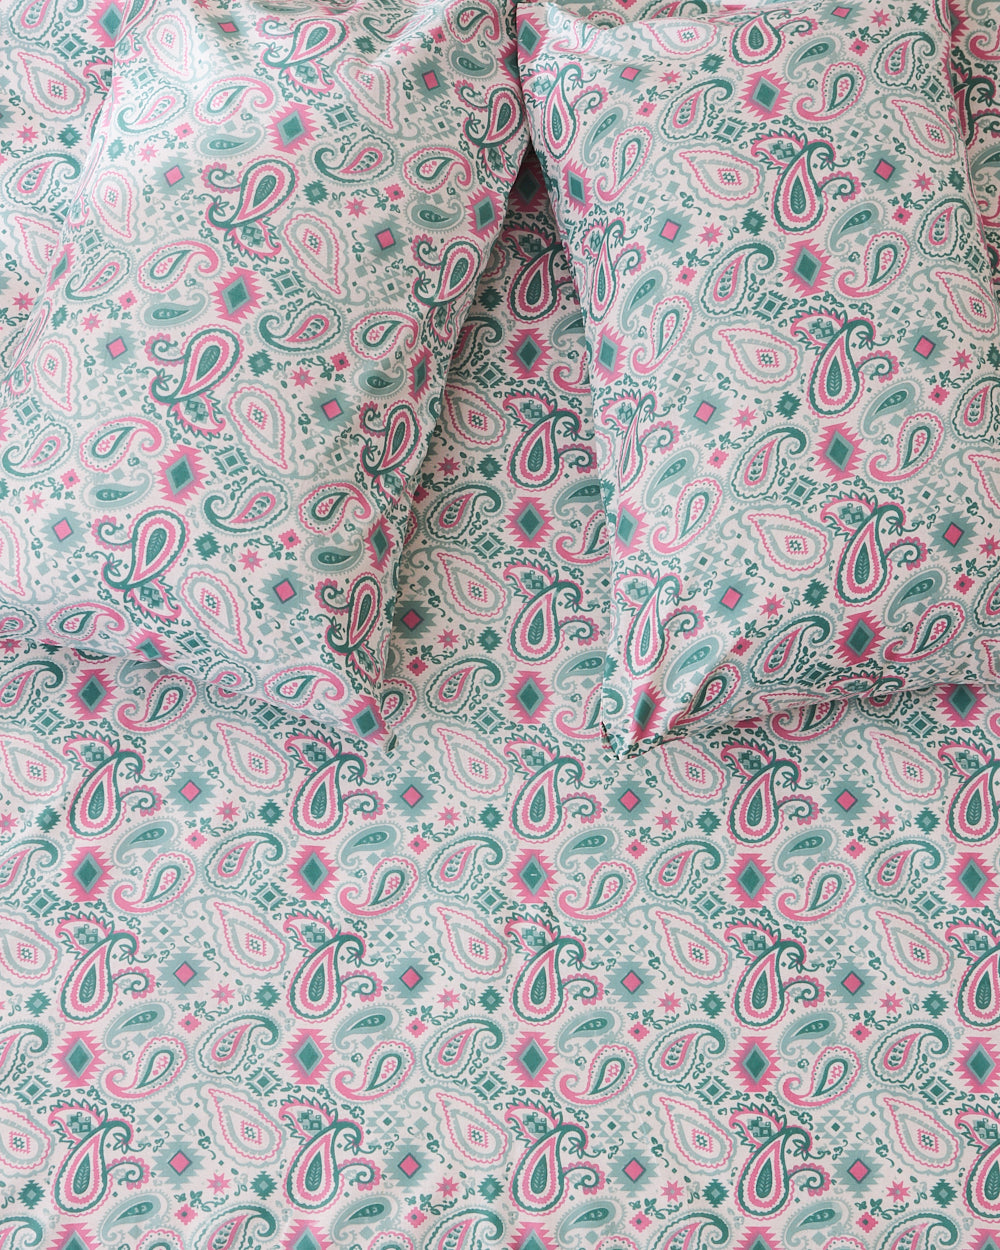 TEAL by Chumbak Paisely Bedsheet, Teal - Queen size, 104 TC